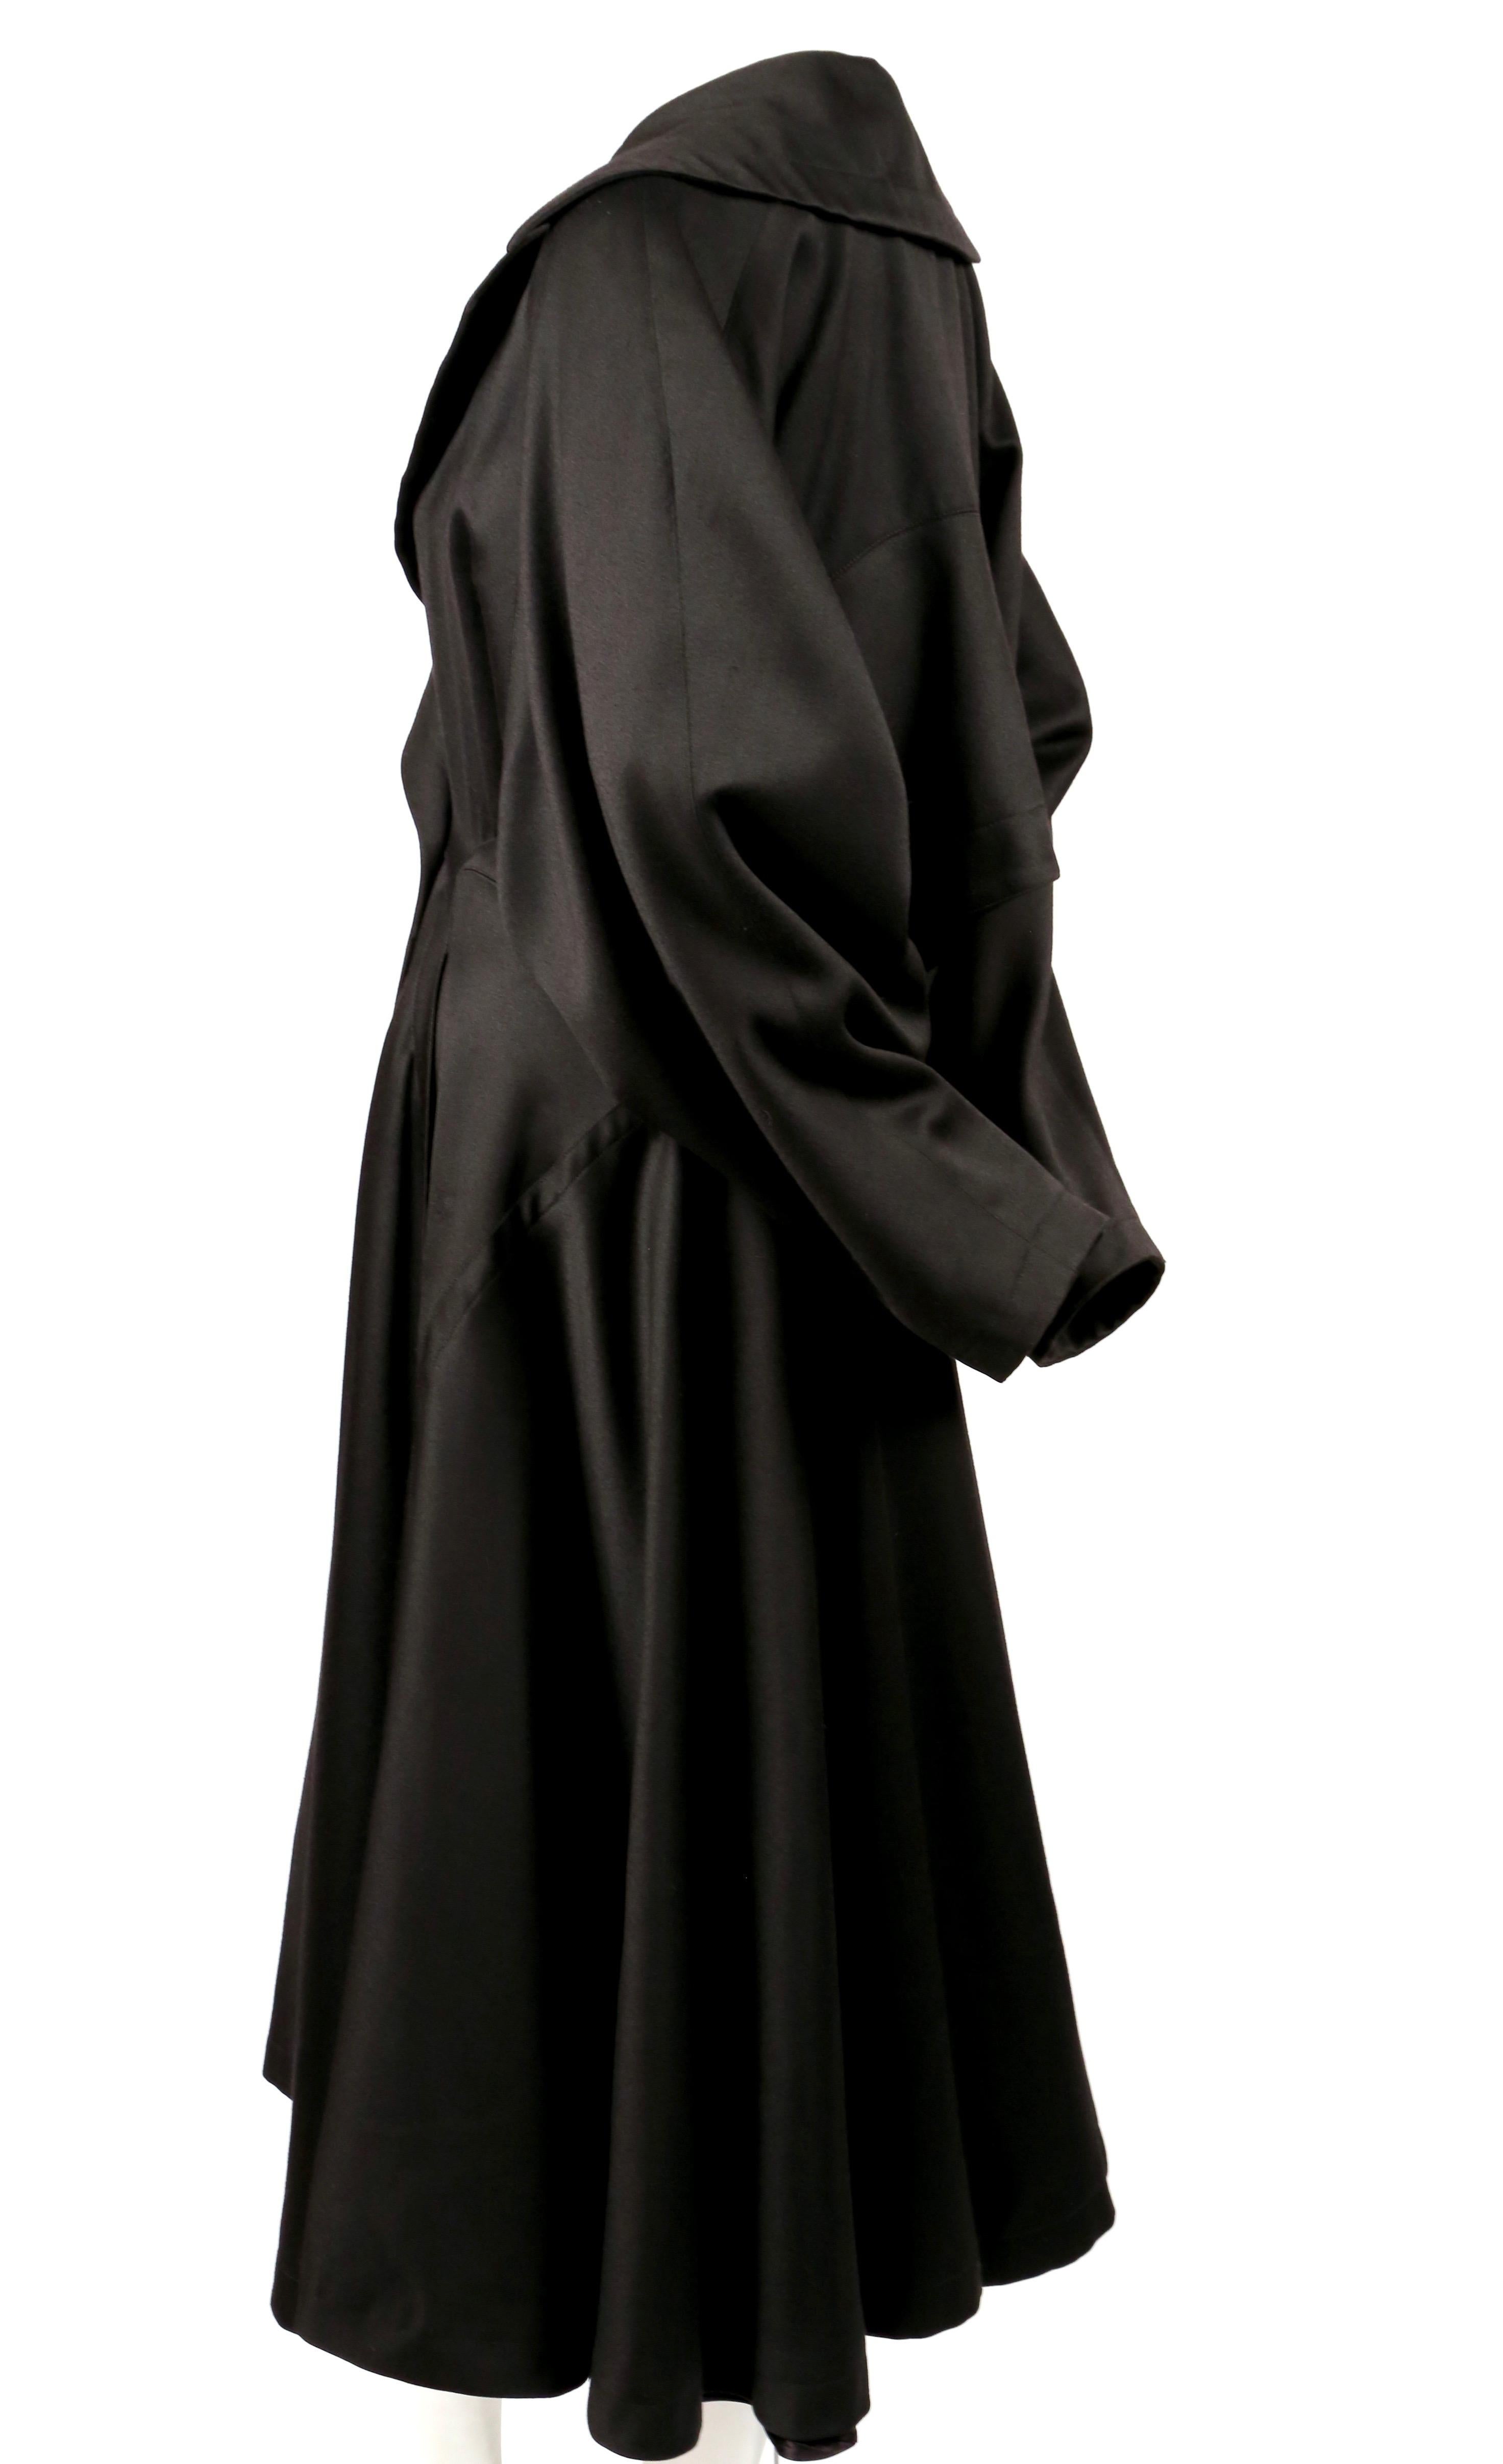 Jet-black, gabardine wool coat with full skirt and uniquely constructed back designed by Azzedine Alaia dating to the late 1980's. Very flattering fit. Coat is labeled a French size 38. Approximate measurements: waist 28-29